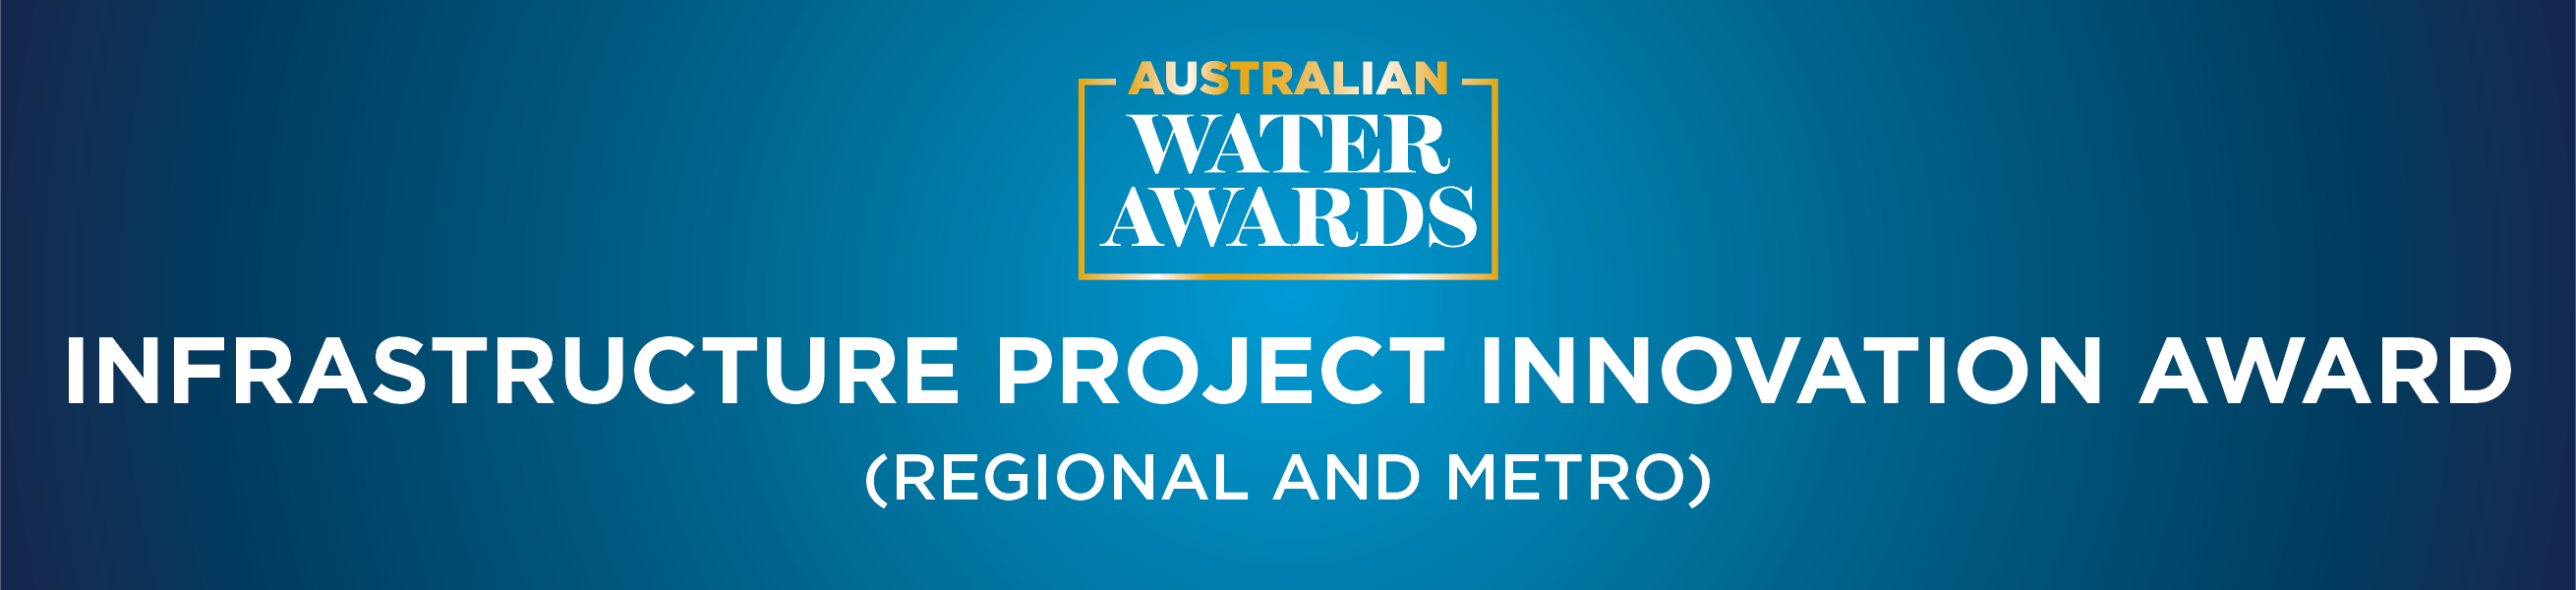 Infrastructure Project Innovation Award